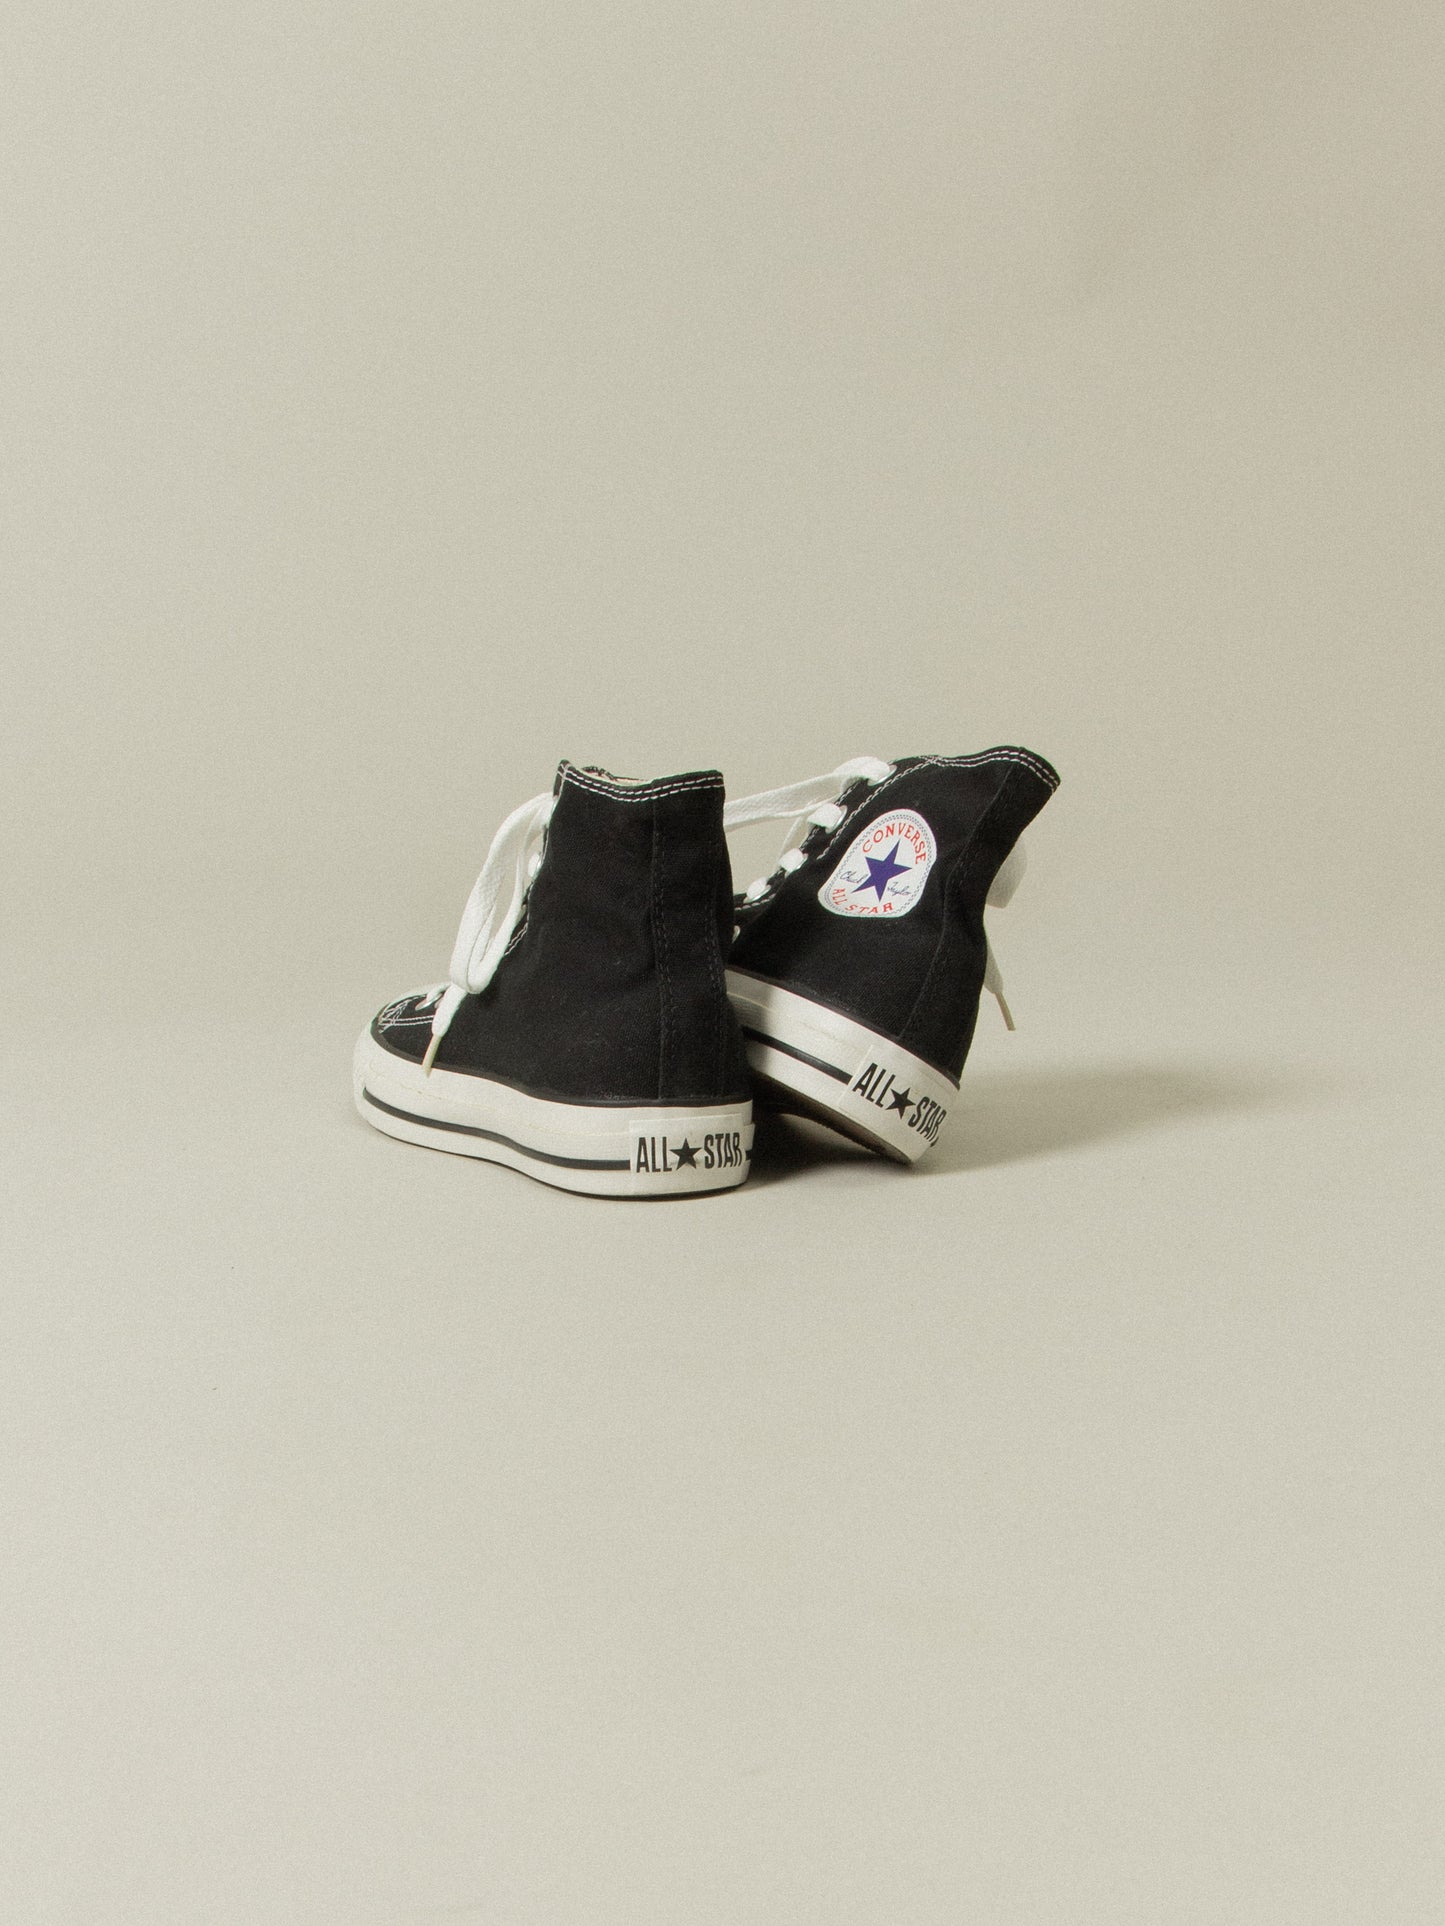 NOS Early 2000s Converse All Star - Black